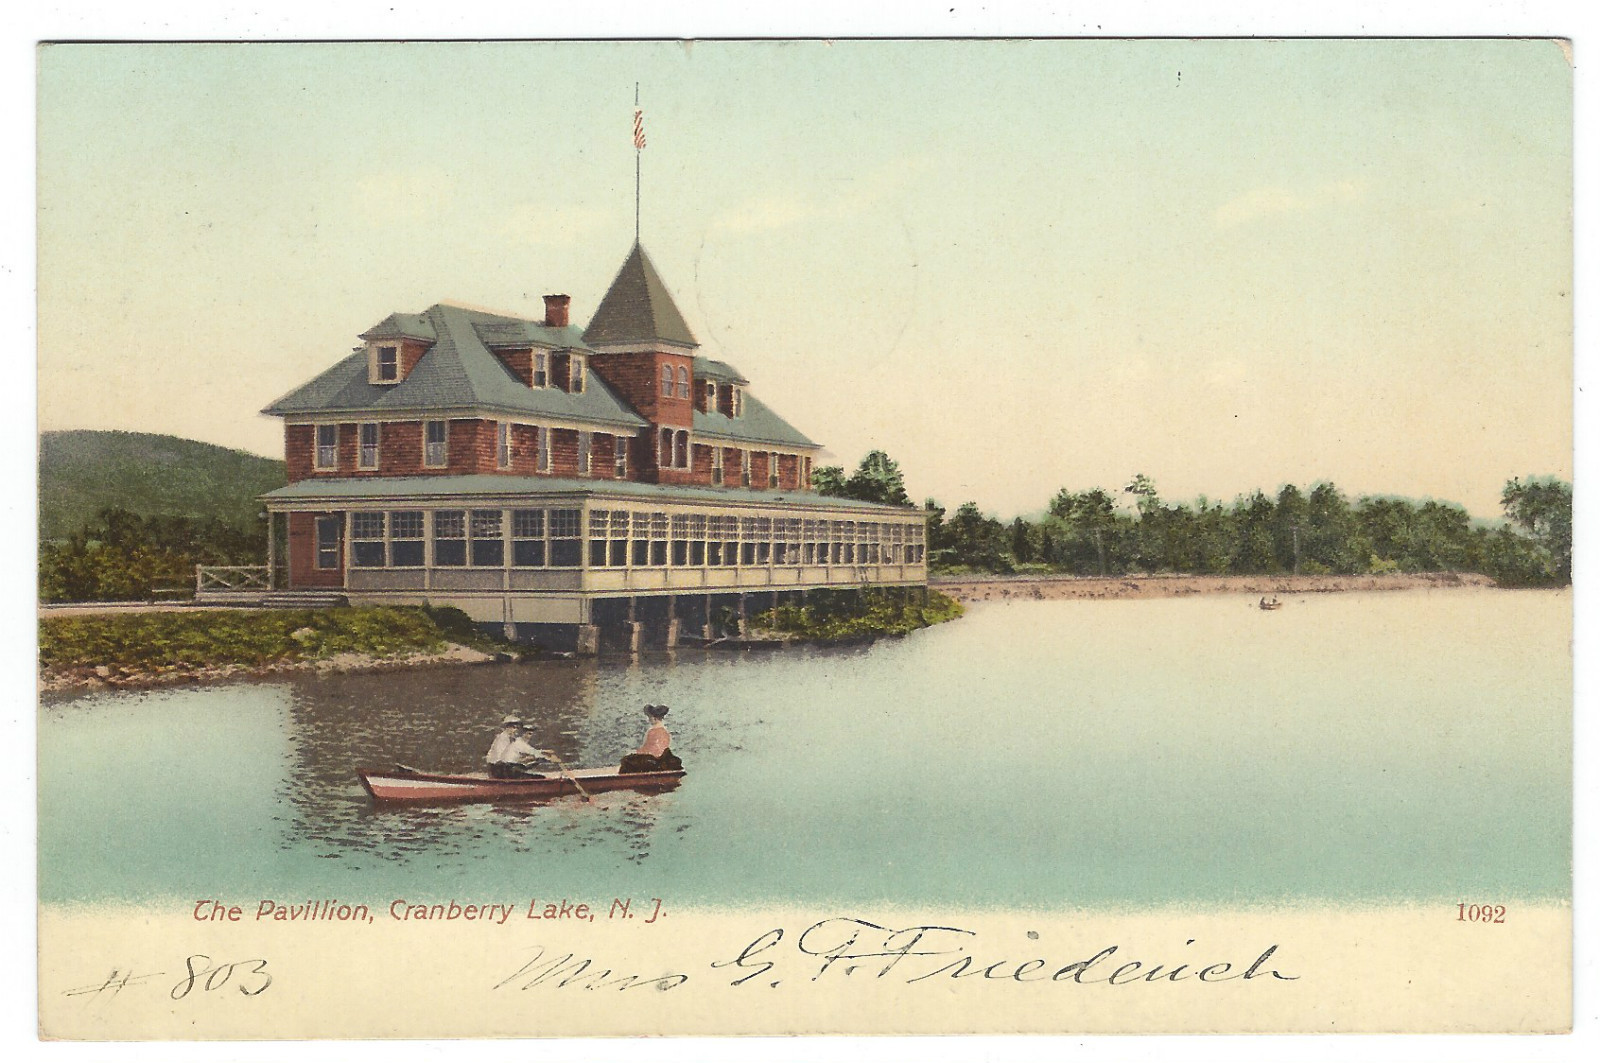 Cranberry Lake - The Pavilion plus some boaters - c 1910